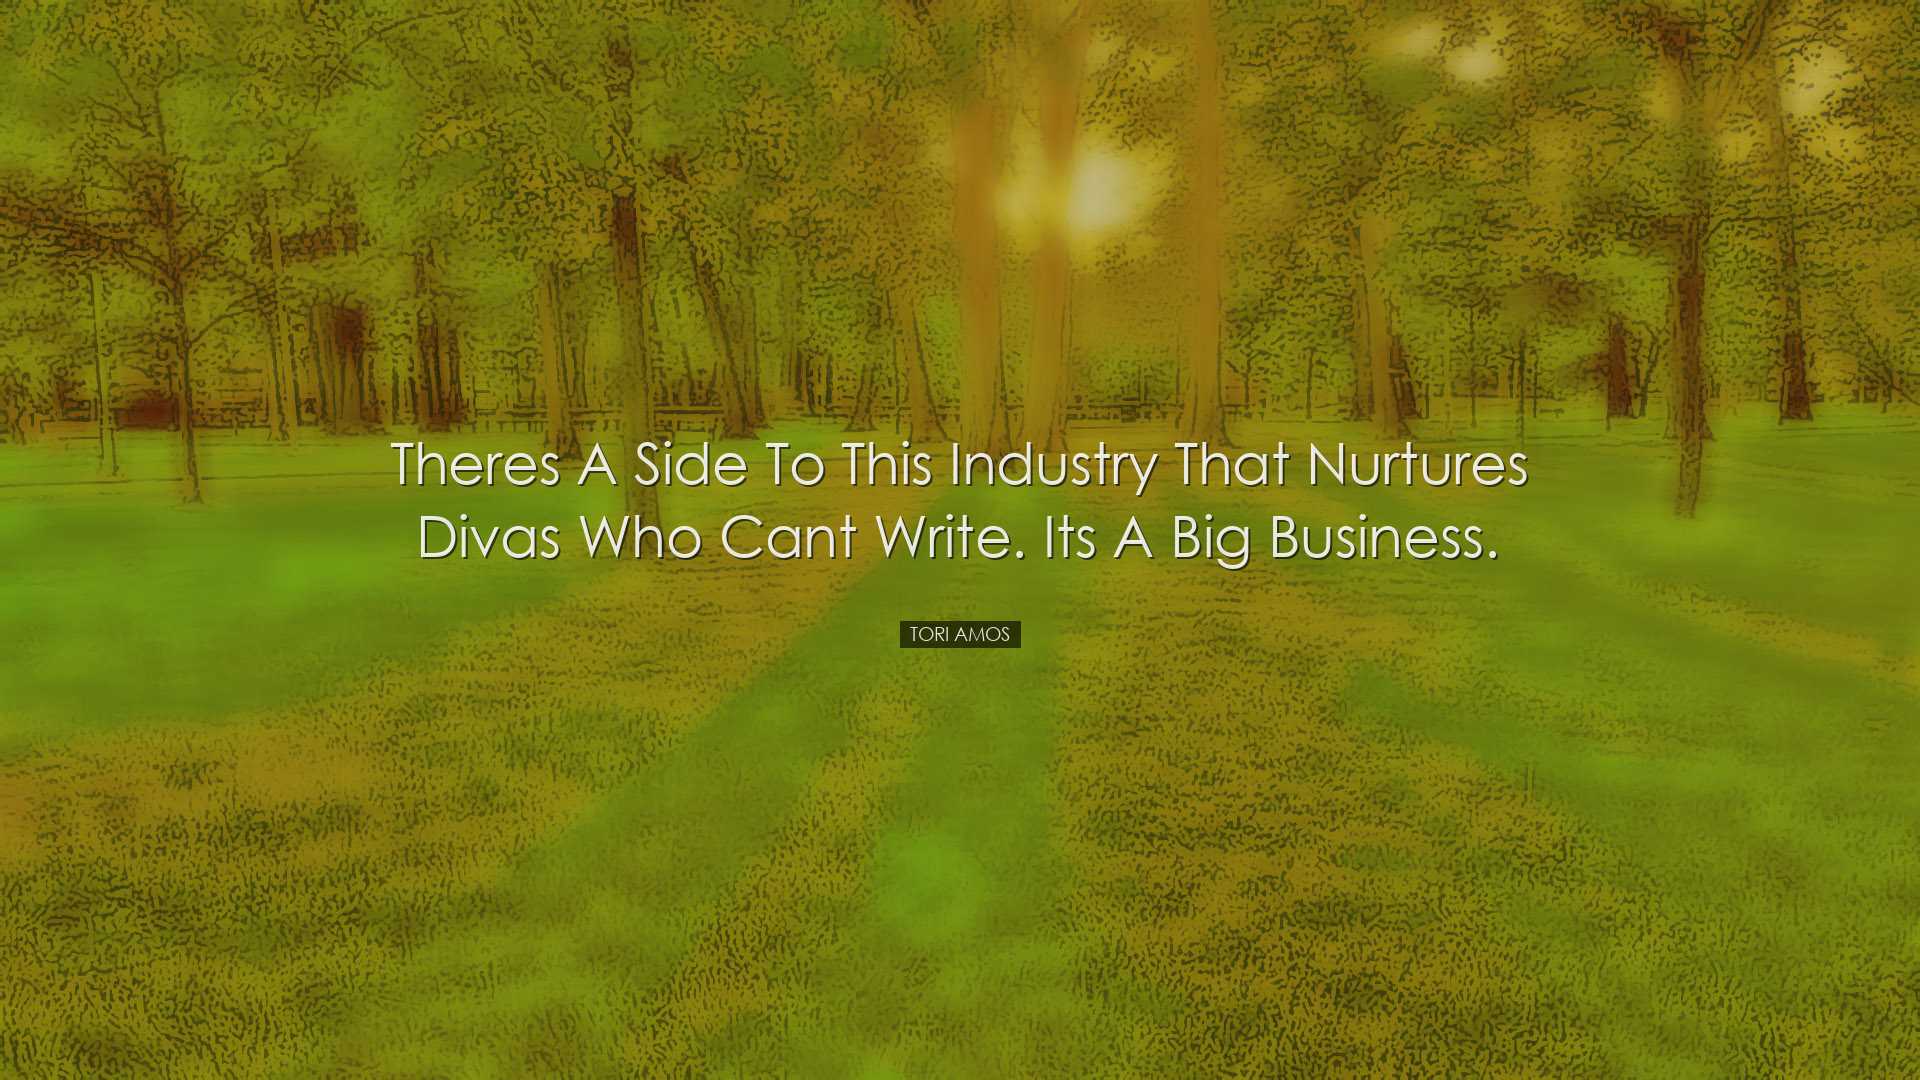 Theres a side to this industry that nurtures divas who cant write.